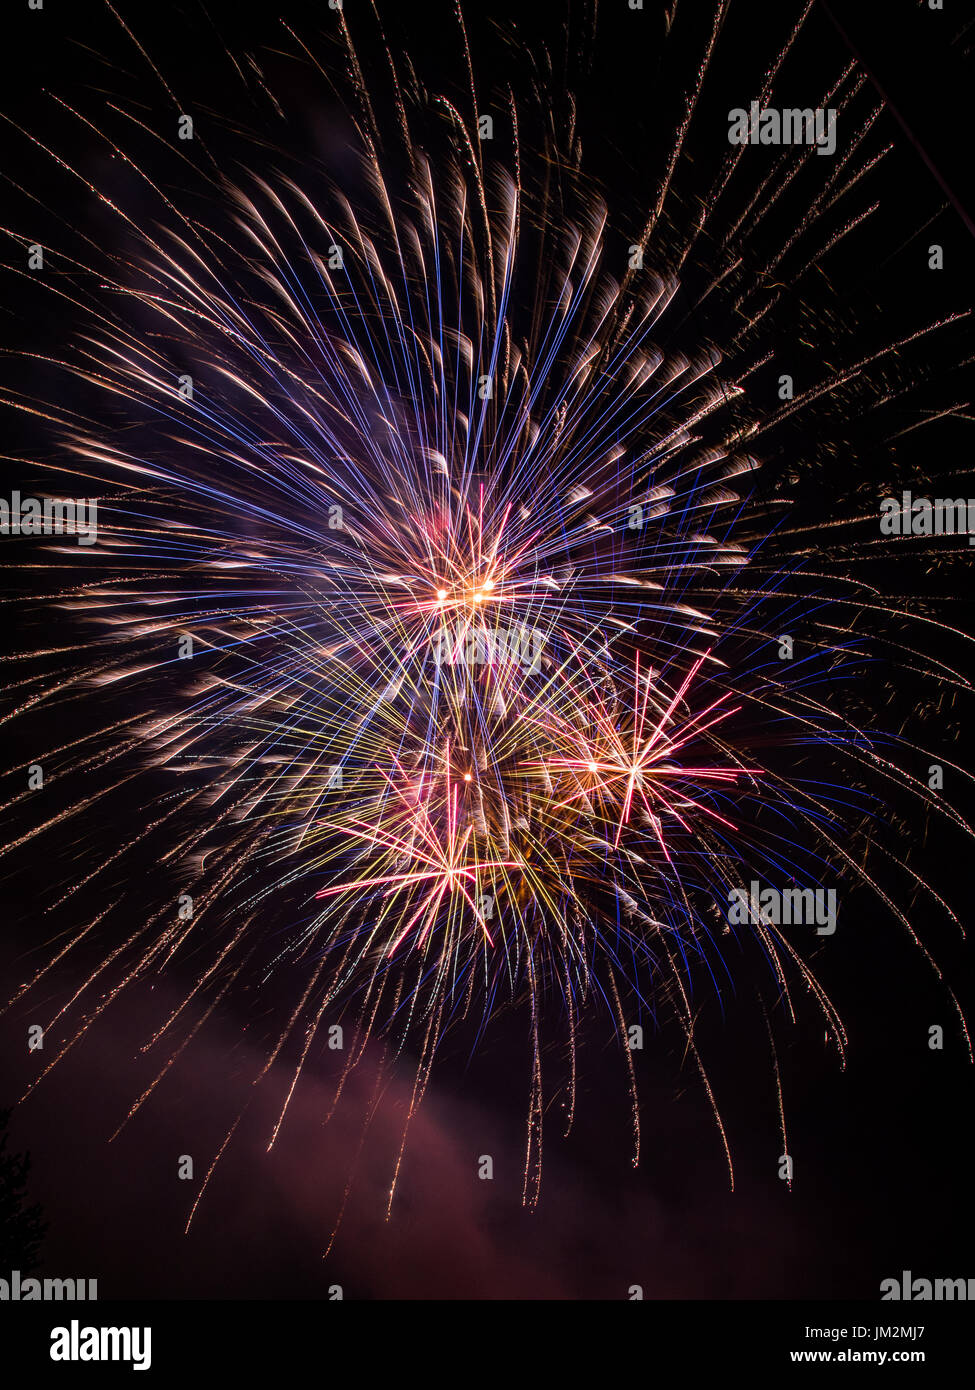 Vertical photo of red, blue, purple and orange fireworks exploding in the night sky Stock Photo